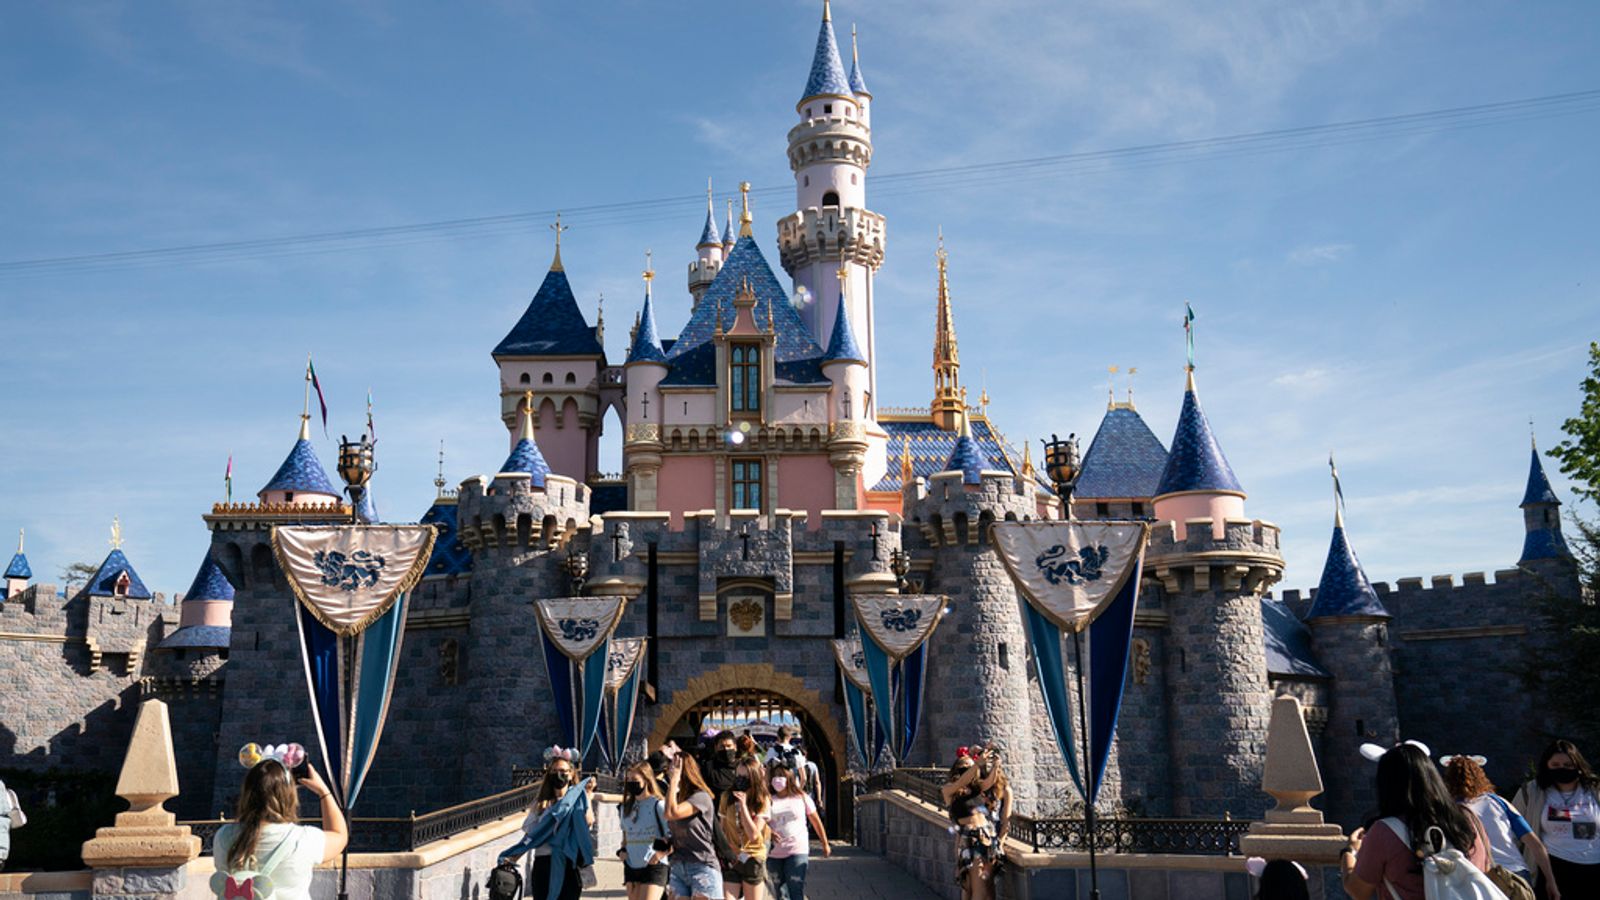 Disney cracks down on disability access rules that allow guests to avoid queues